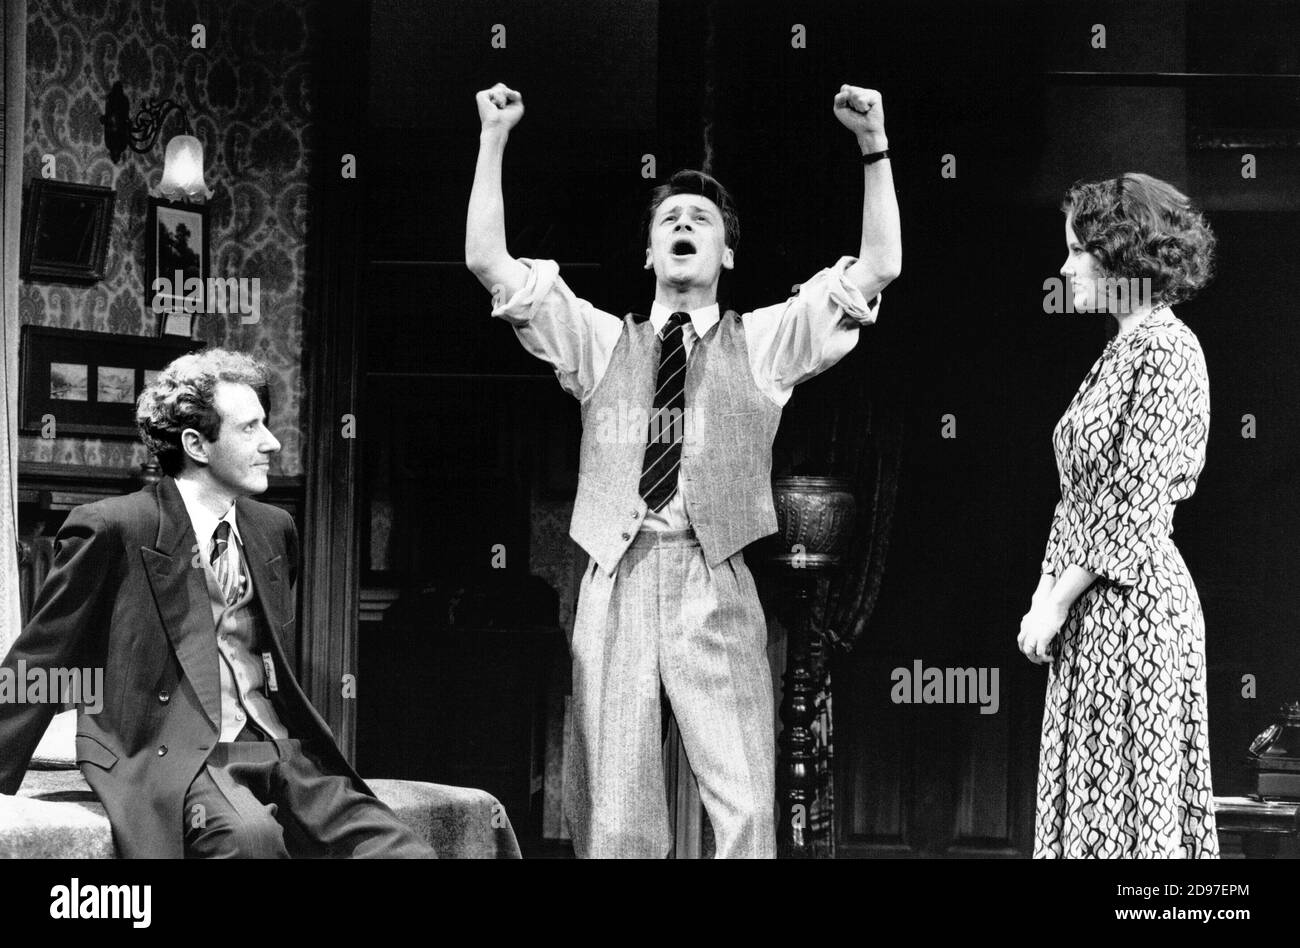 AWAKE AND SING!  by Clifford Odets  design: Martin Johns  lighting: Leonard Tucker  director: Lou Stein  l-r: Michael J. Jackson (Moe Axelrod), Michael Grandage (Ralph Berger), Elaine R. Smith (Hennie Berger)  Palace Theatre, Watford, England  04/04/1989                 (c) Donald Cooper/Photostage   photos@photostage.co.uk   ref/BW-P-153-18 Stock Photo